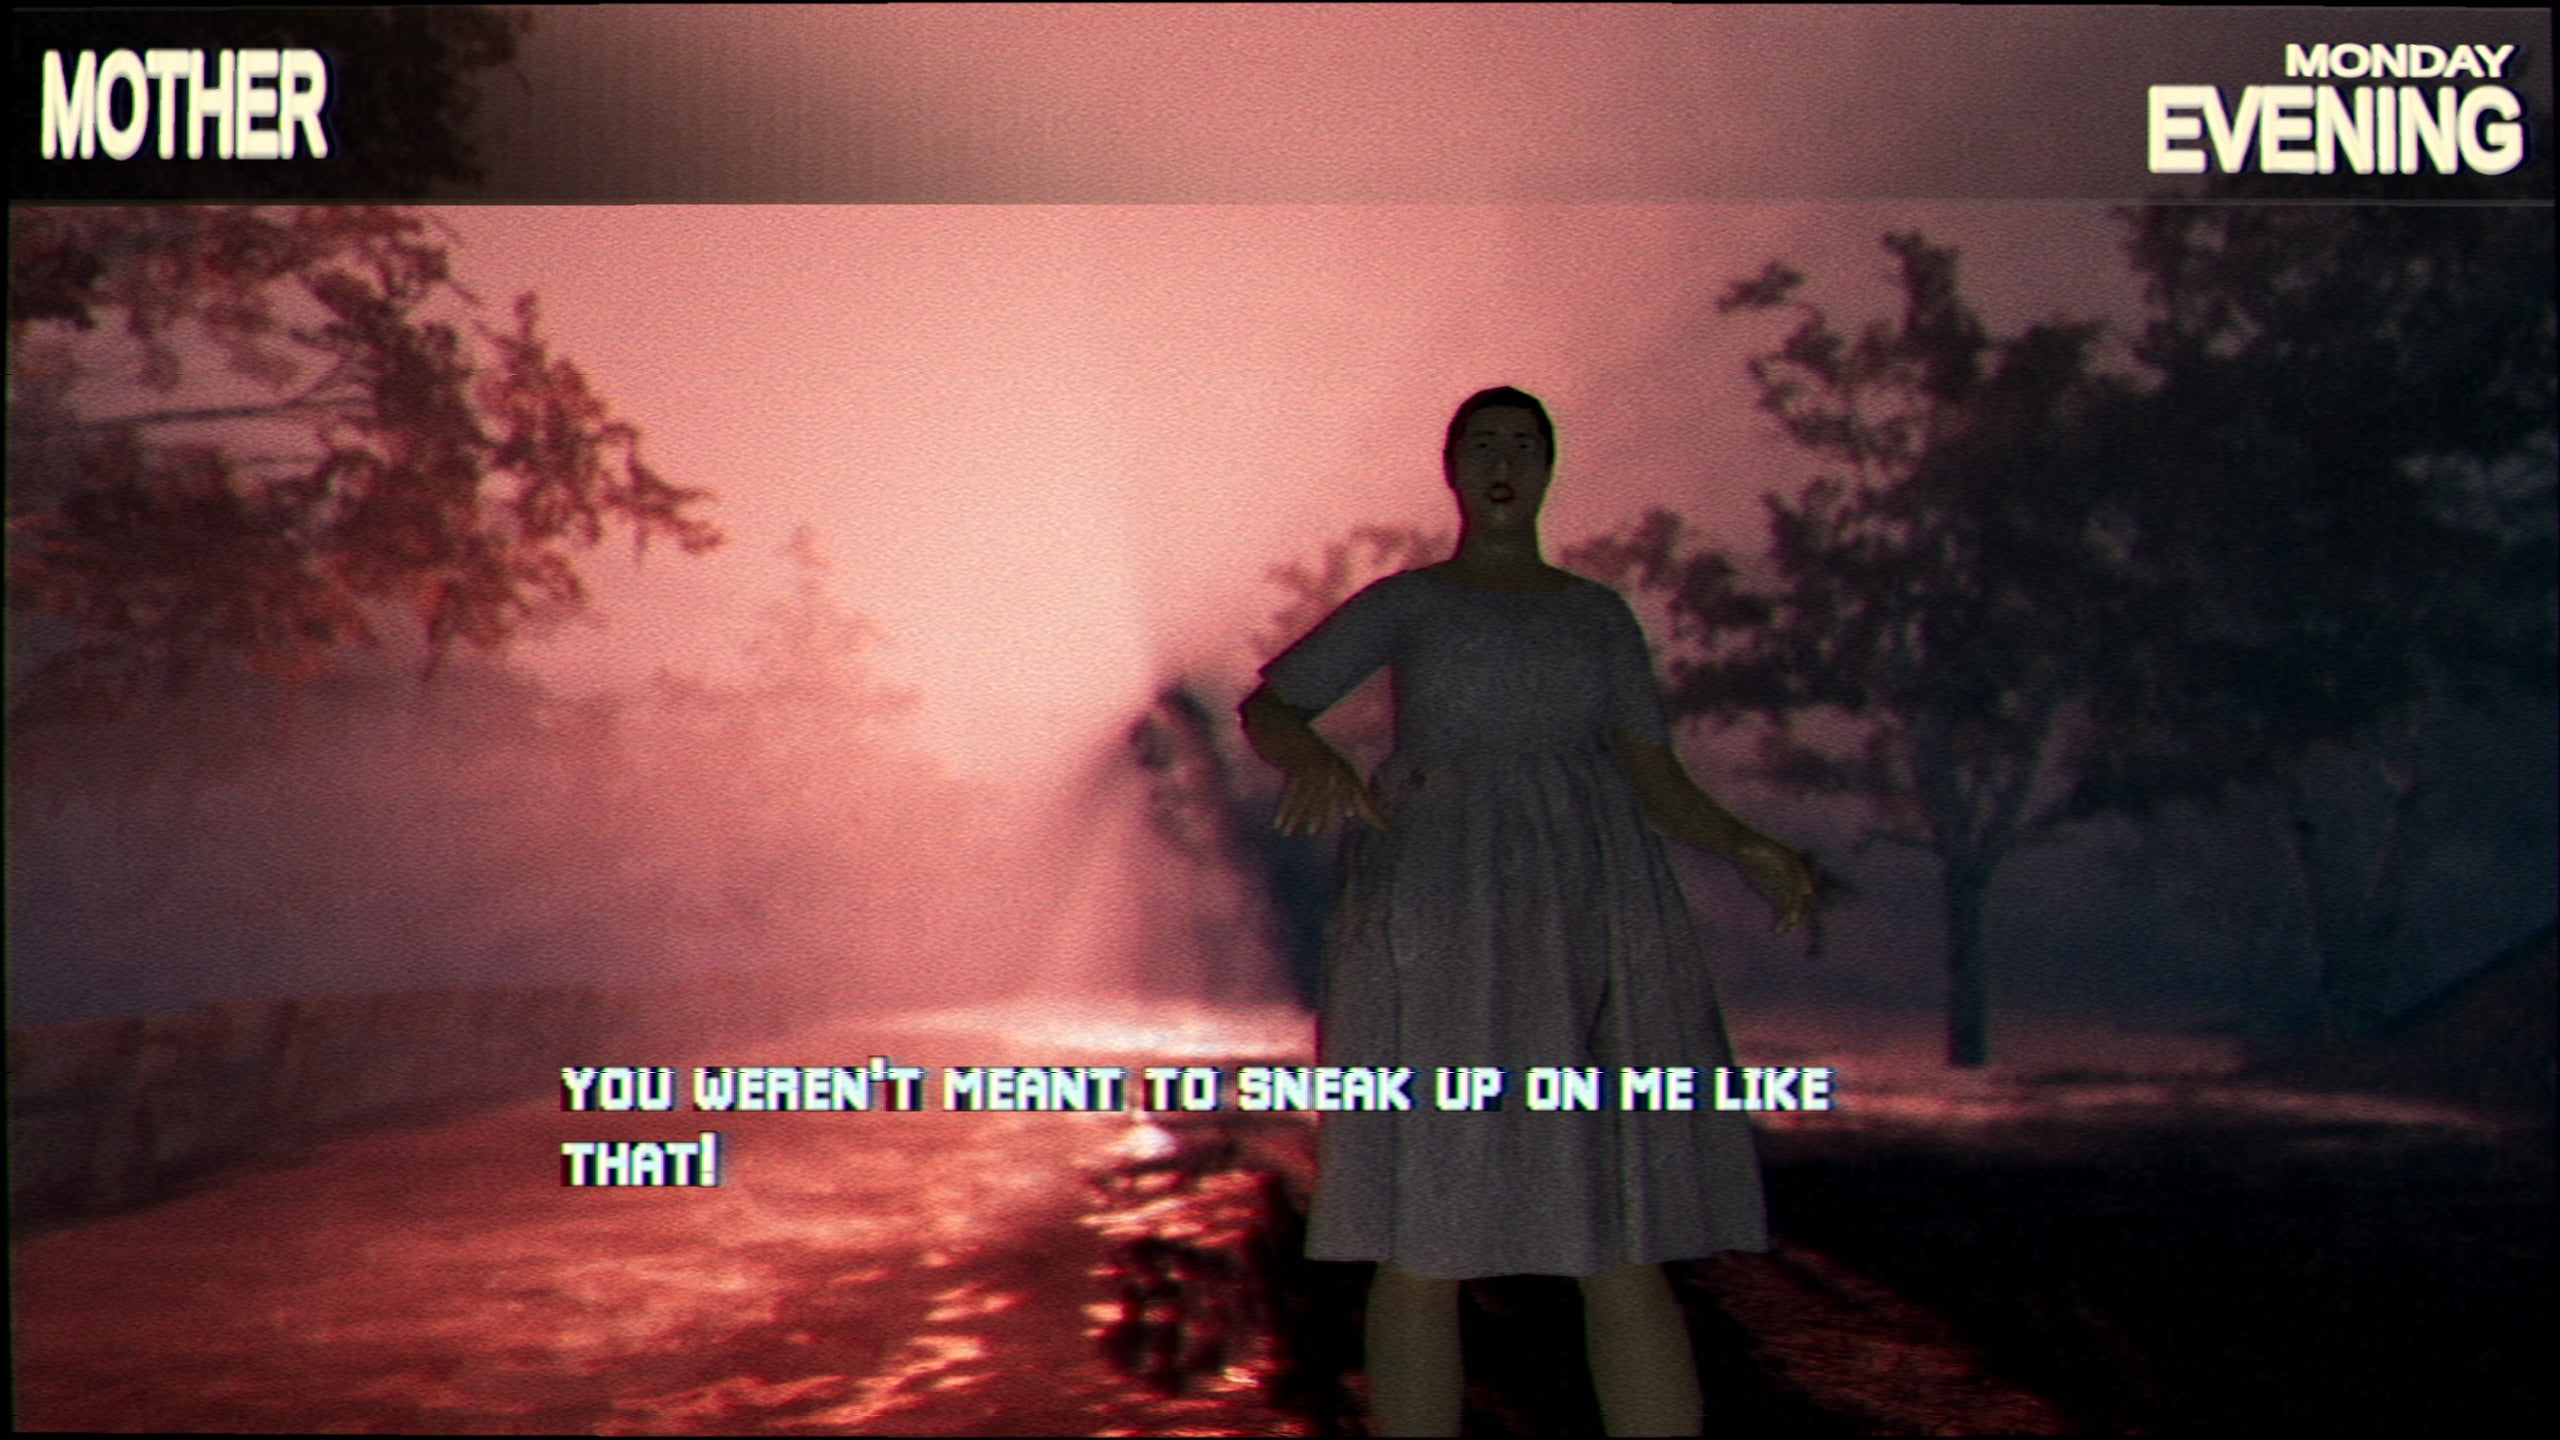 Talking with eerie Mother in a Mothered screenshot.